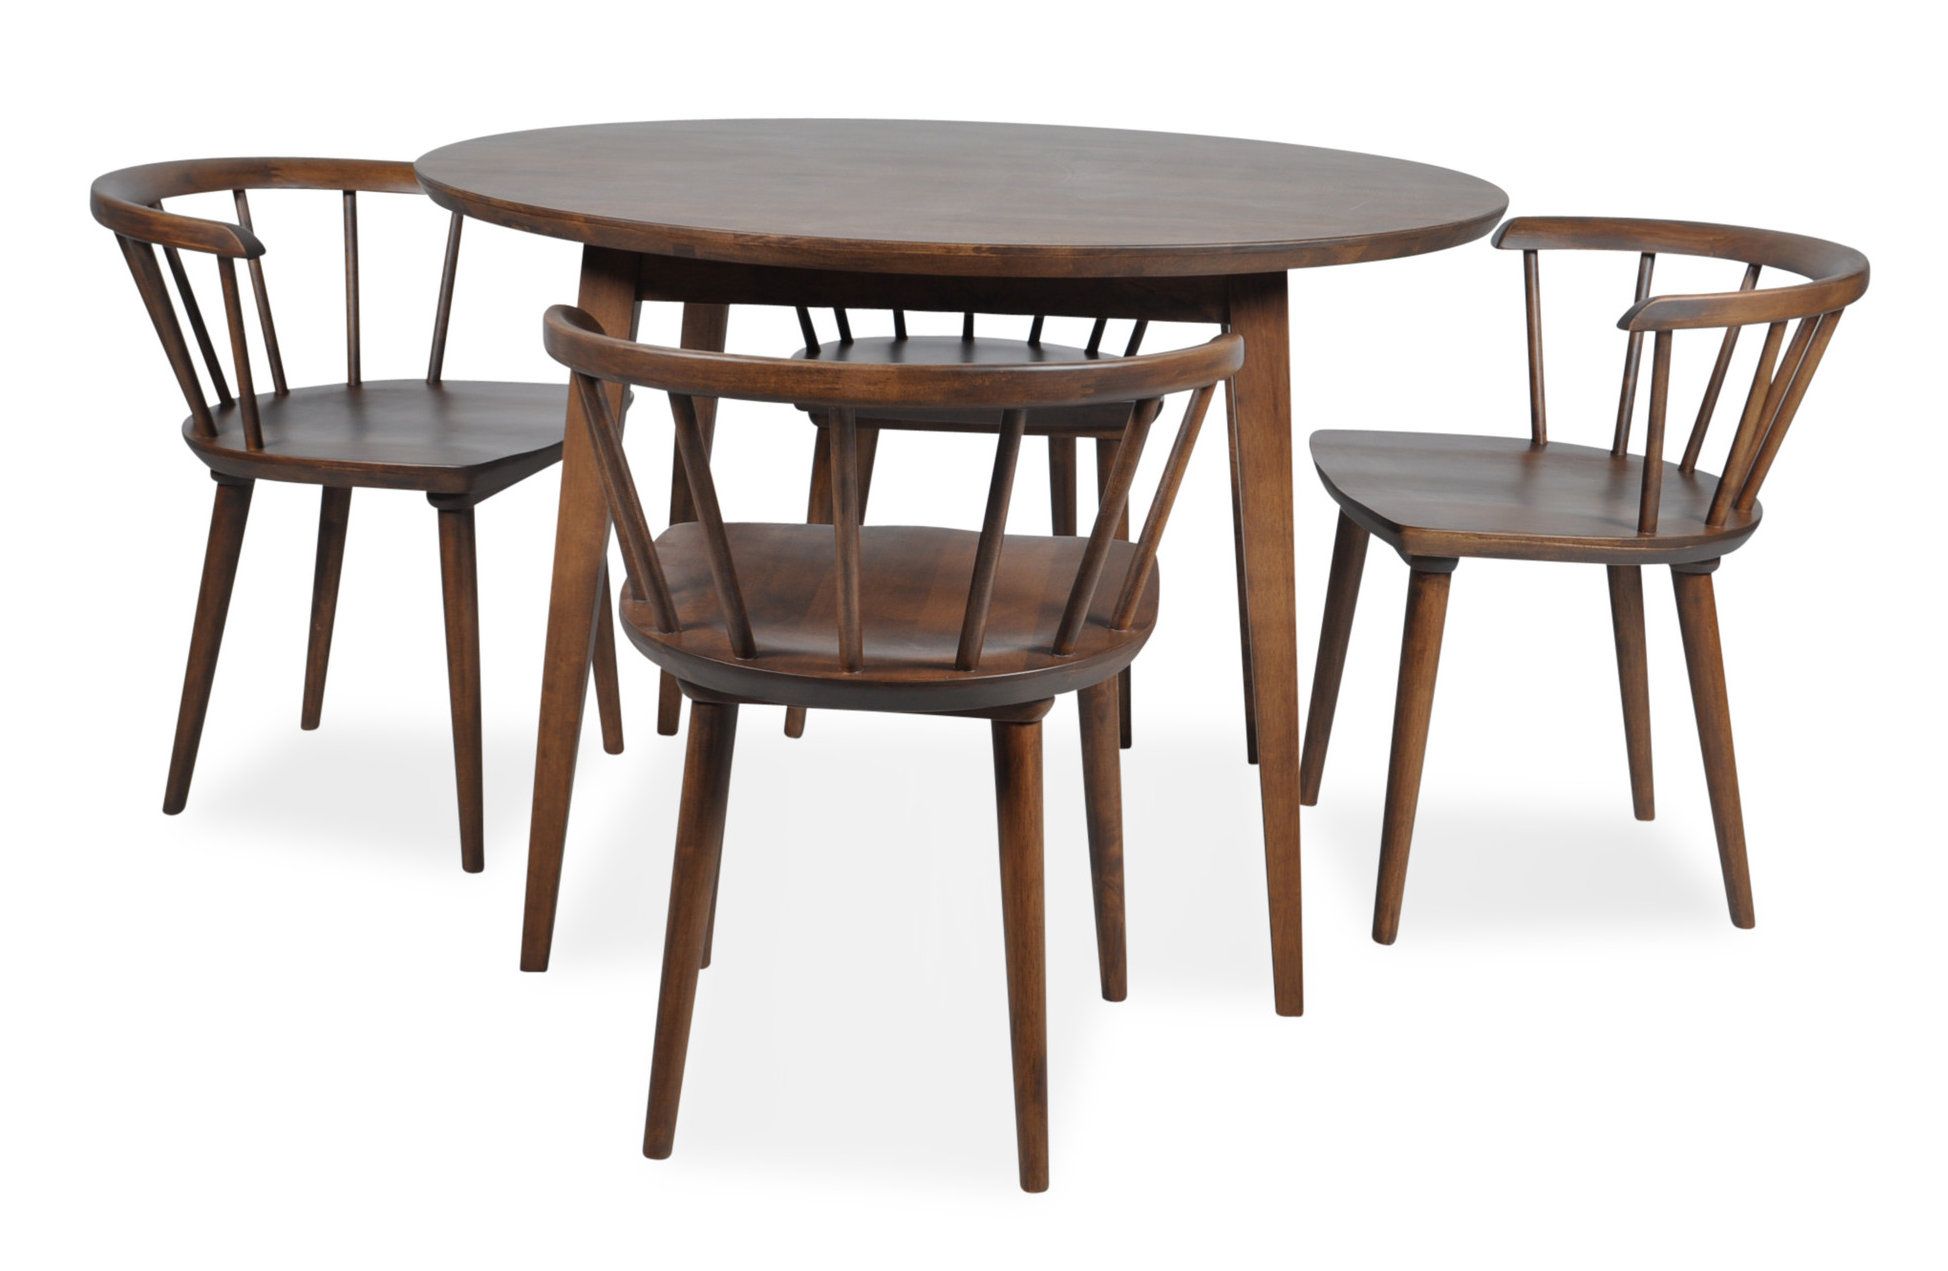 Widely Used 5 Piece Breakfast Nook Dining Sets For Burgan 5 Piece Solid Wood Breakfast Nook Dining Set & Reviews (View 10 of 20)